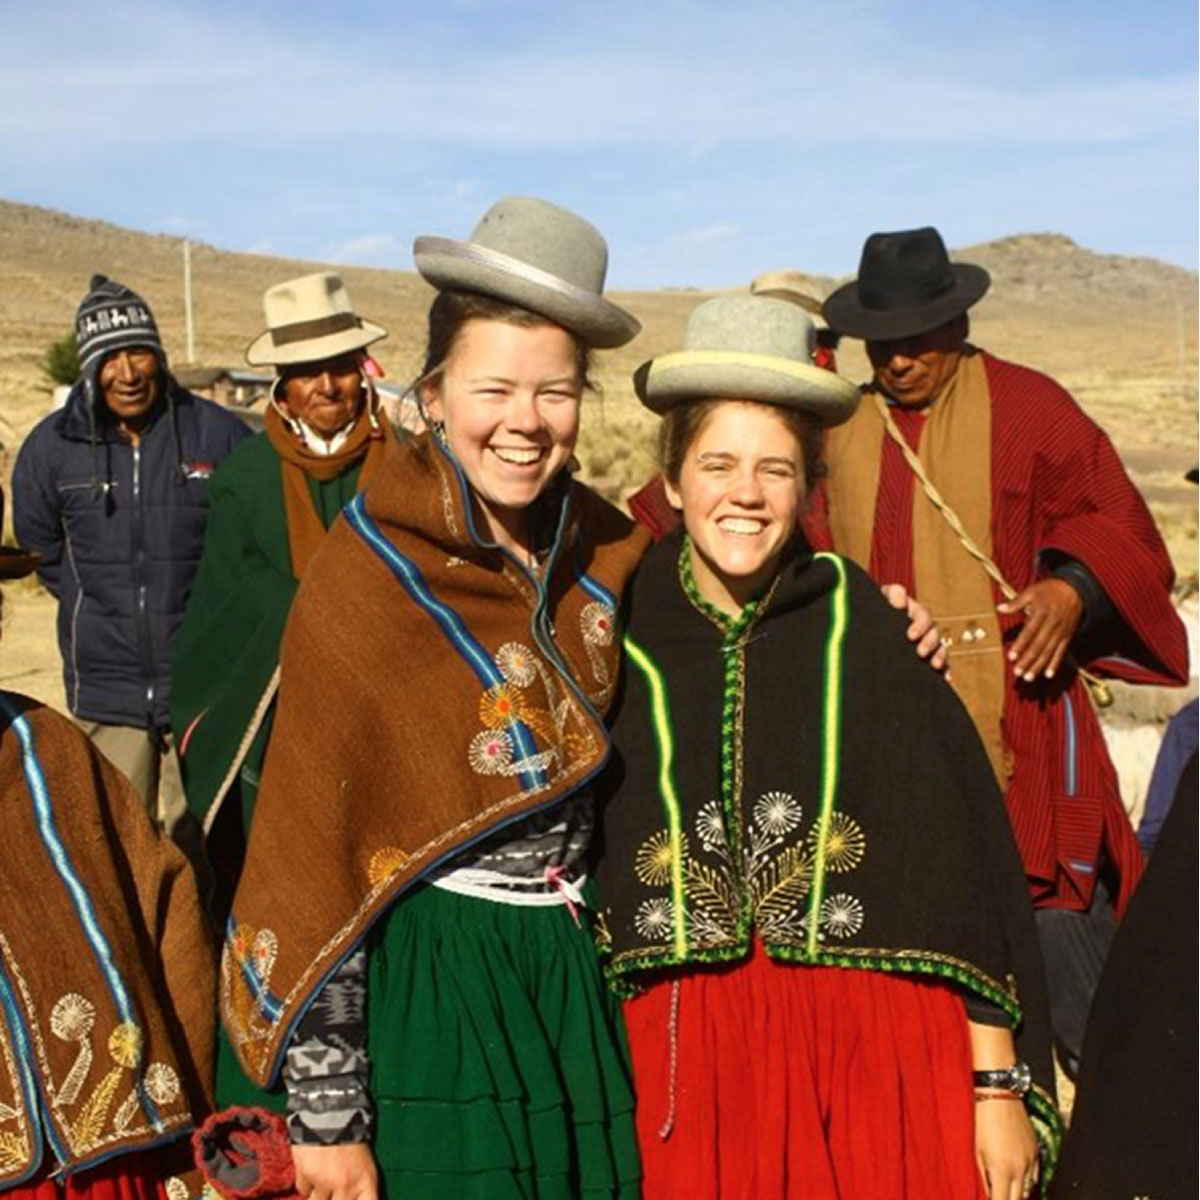 Claire Majors and Cat Feistner wearing hats and clothes from Carani, Bolivia